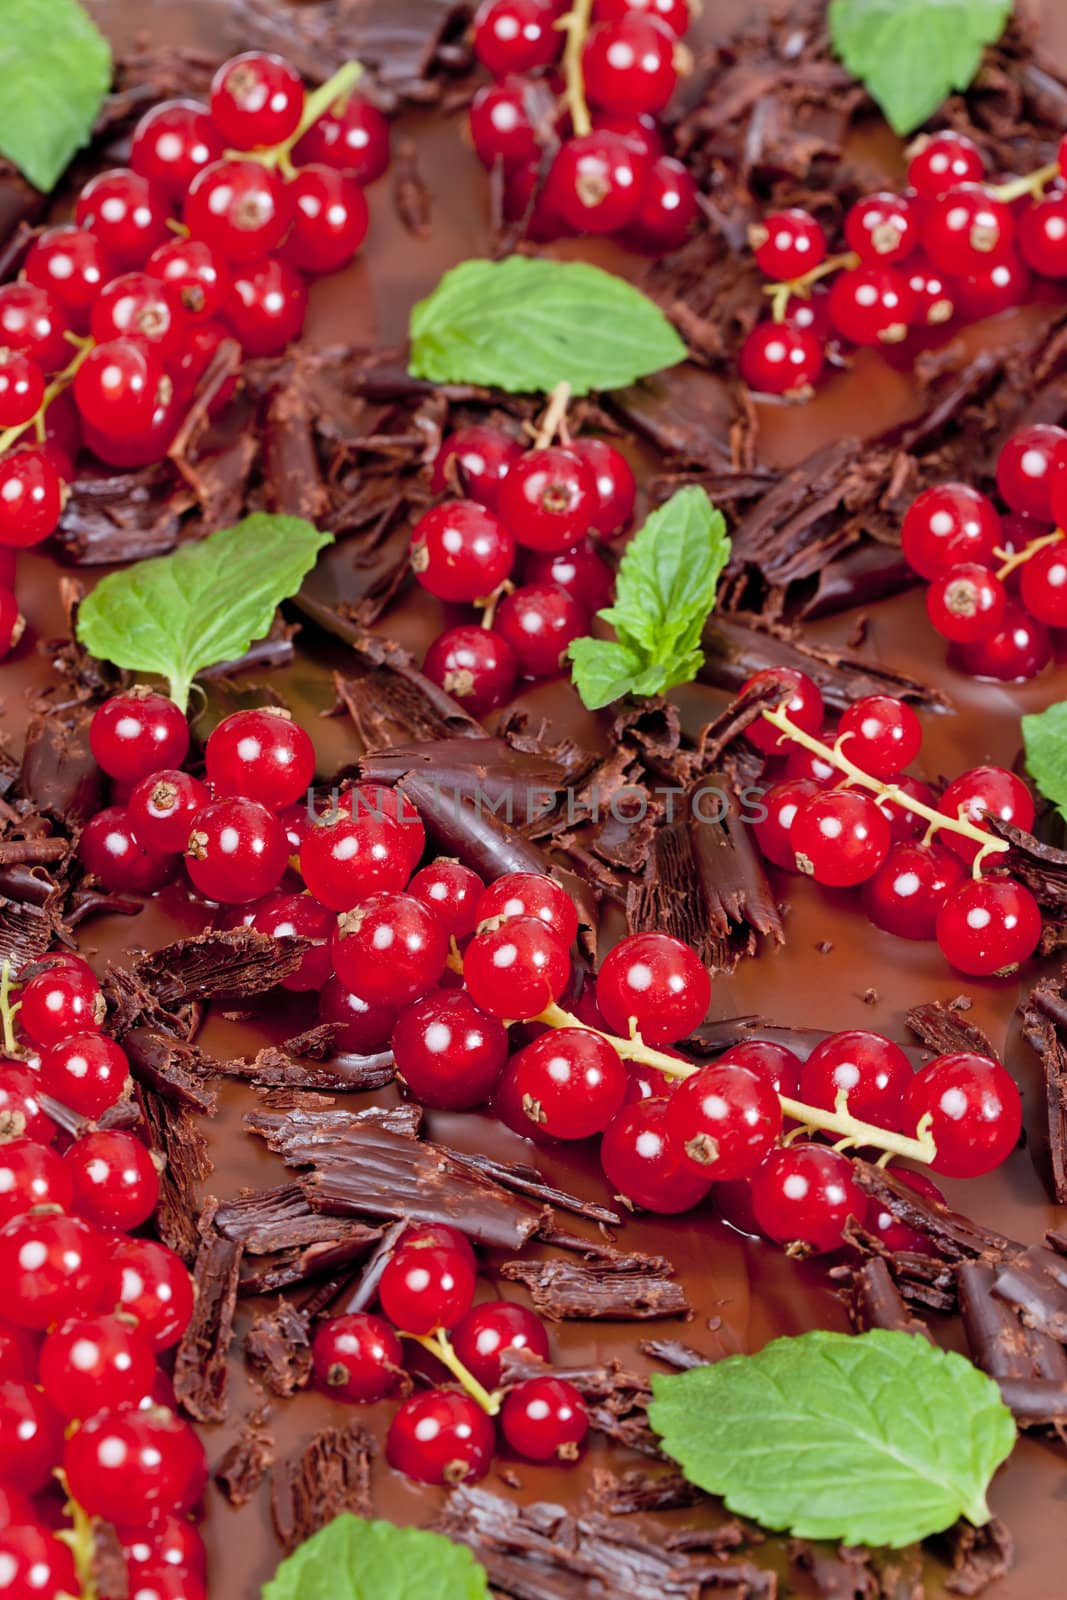 red currant and mint with chocolate by phbcz